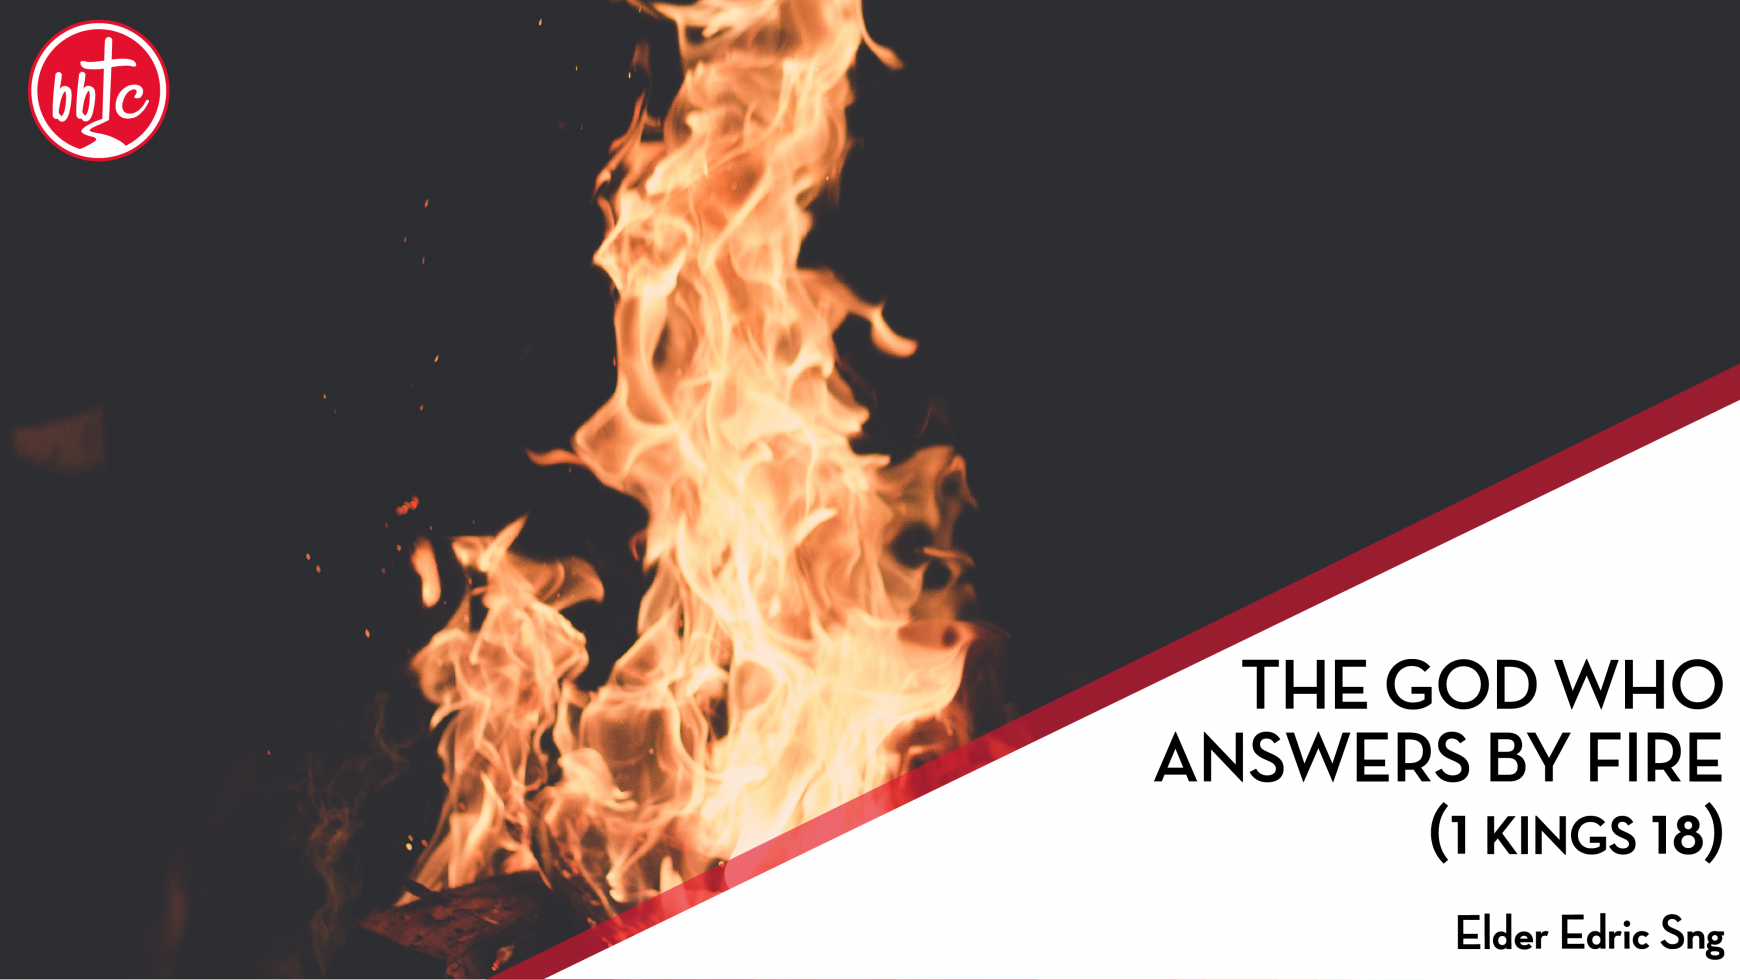 The God who answers by fire